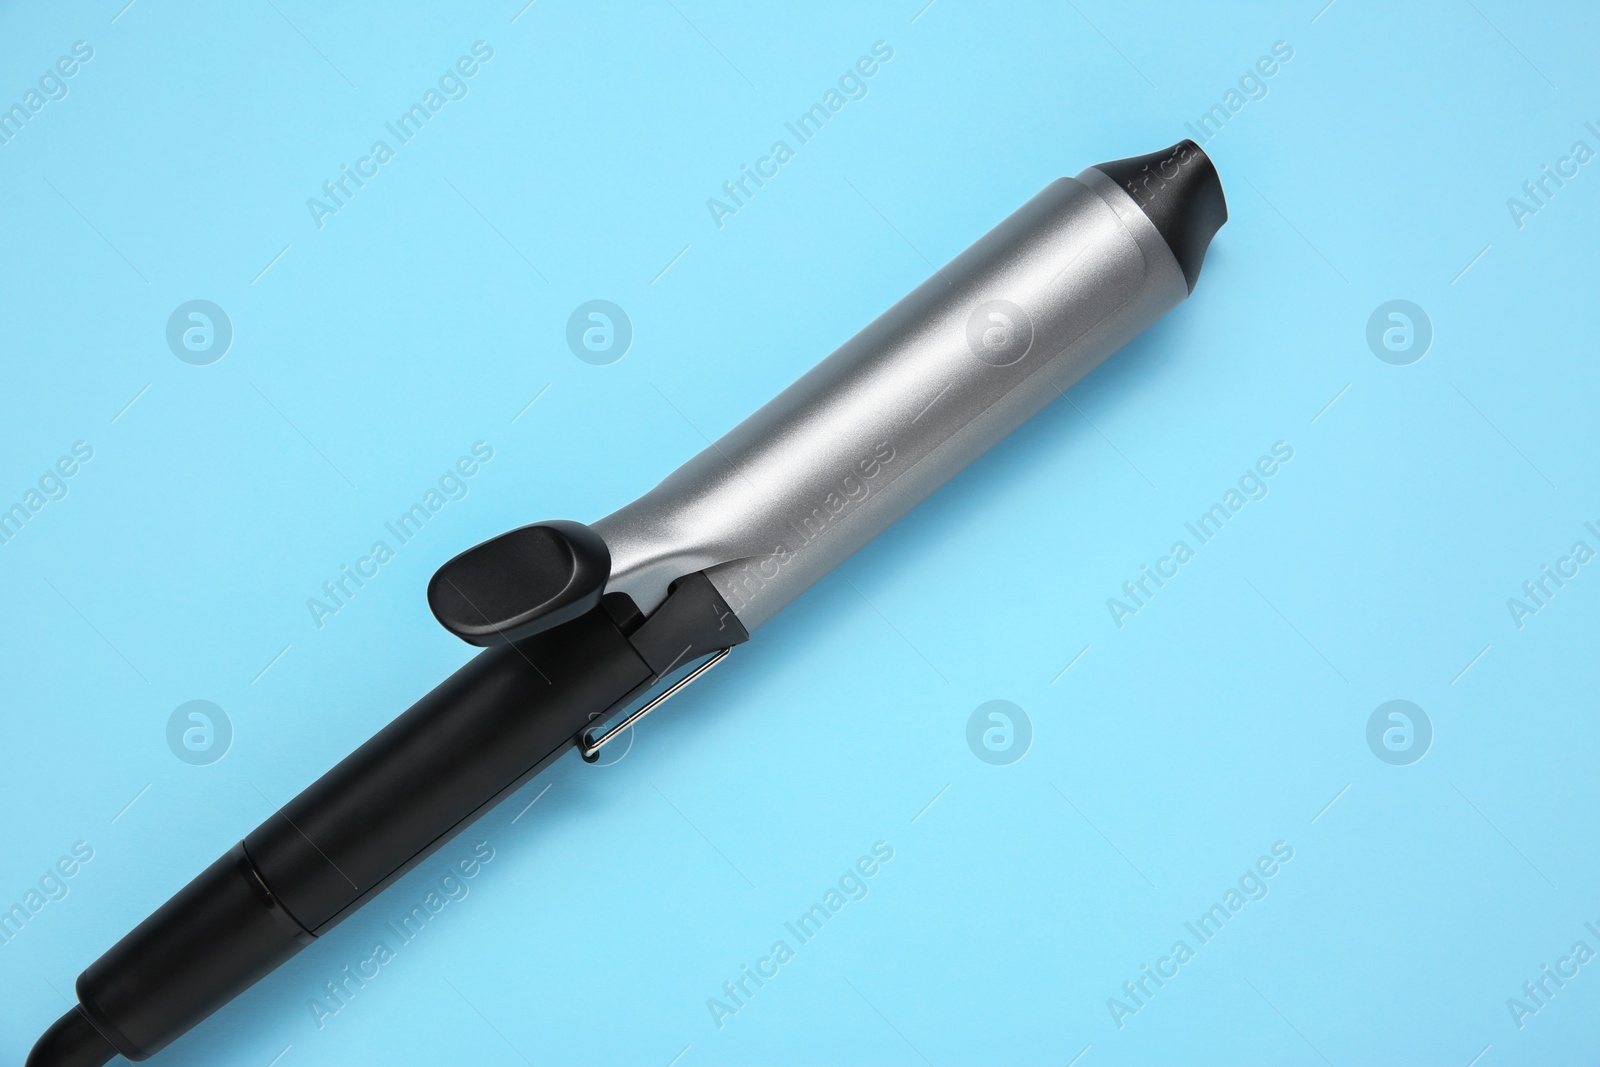 Photo of Hair styling appliance. One curling iron on light blue background, top view